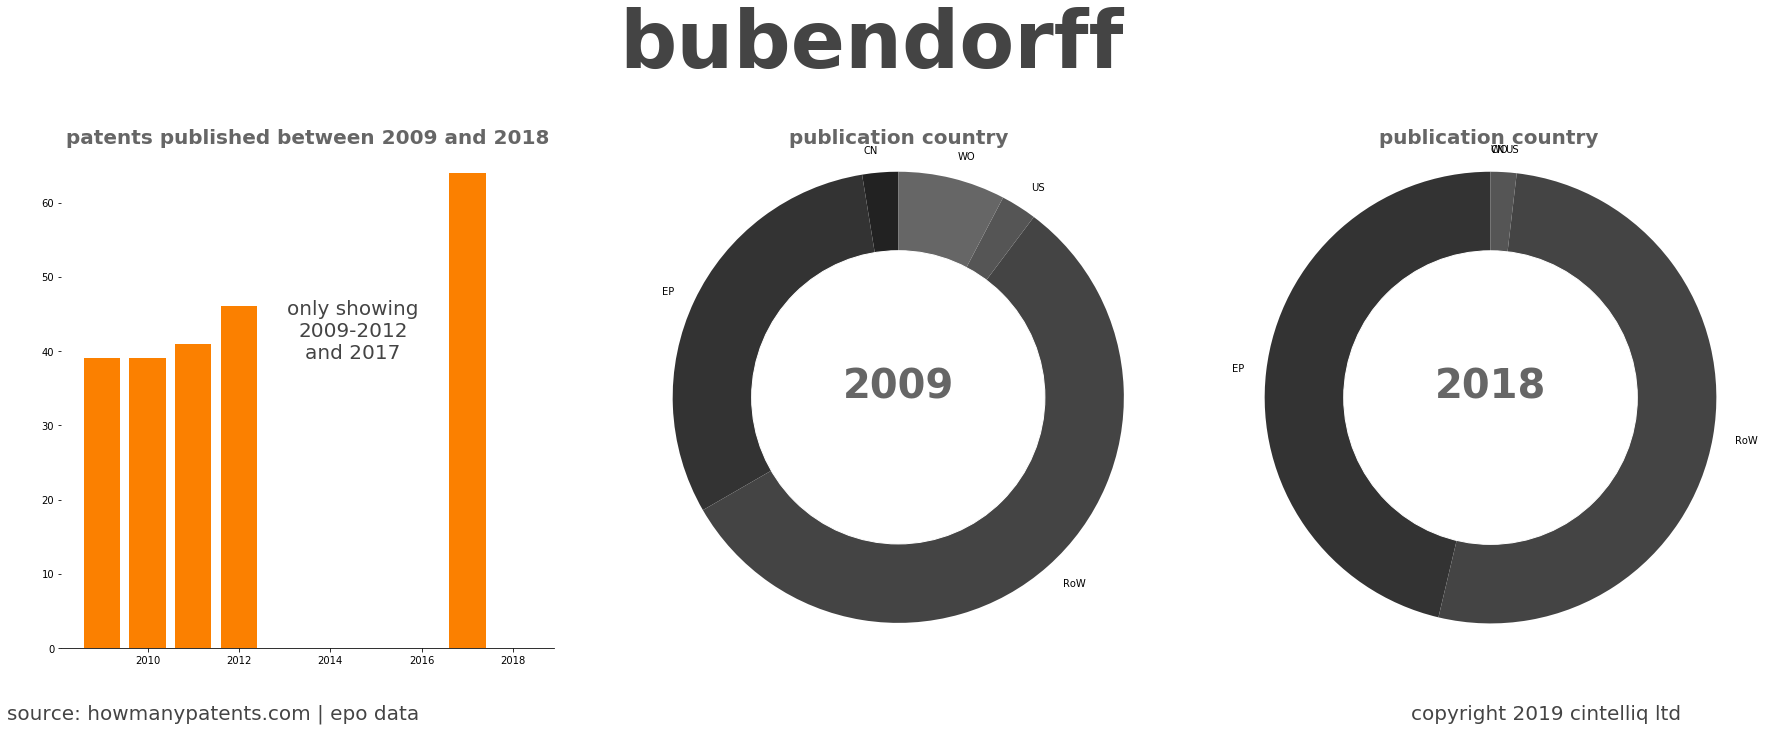 summary of patents for Bubendorff